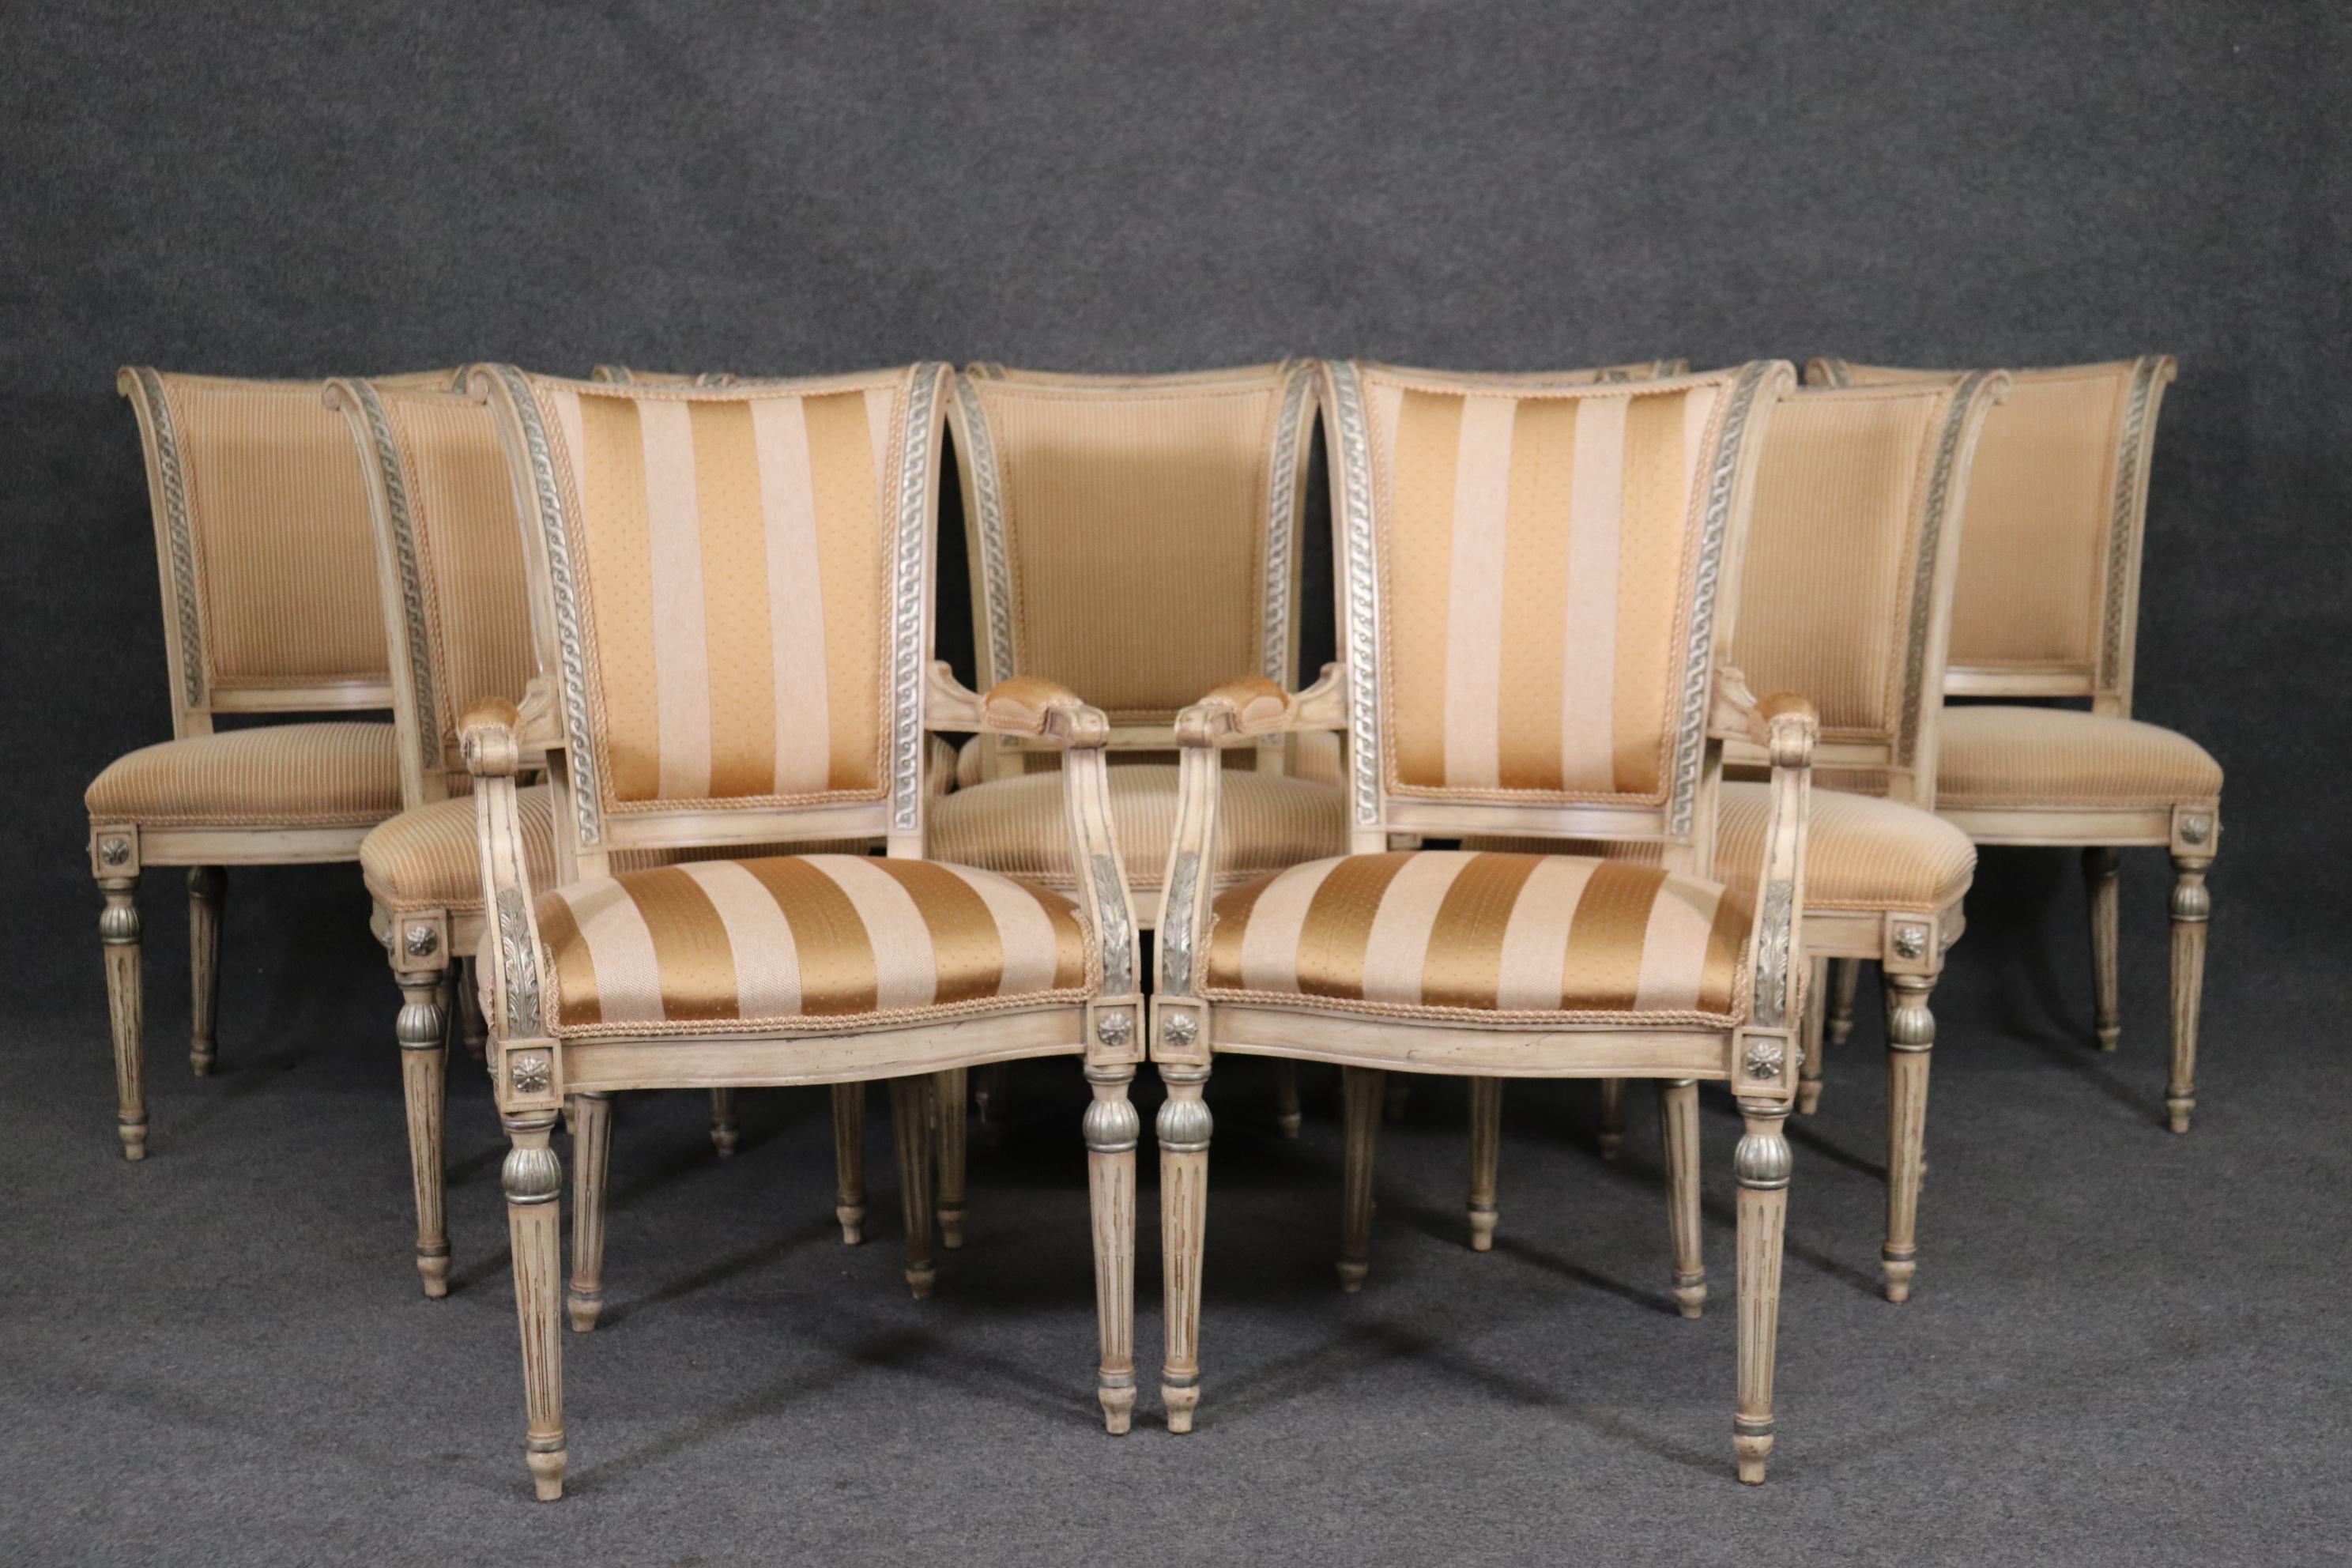 Karges of Evansville Indiana has been America's premier manufacturer of fine French recreations since 1886 and continues to make America's best and most expensive furniture to this day. These gorgeous dining chairs are in very good condition with